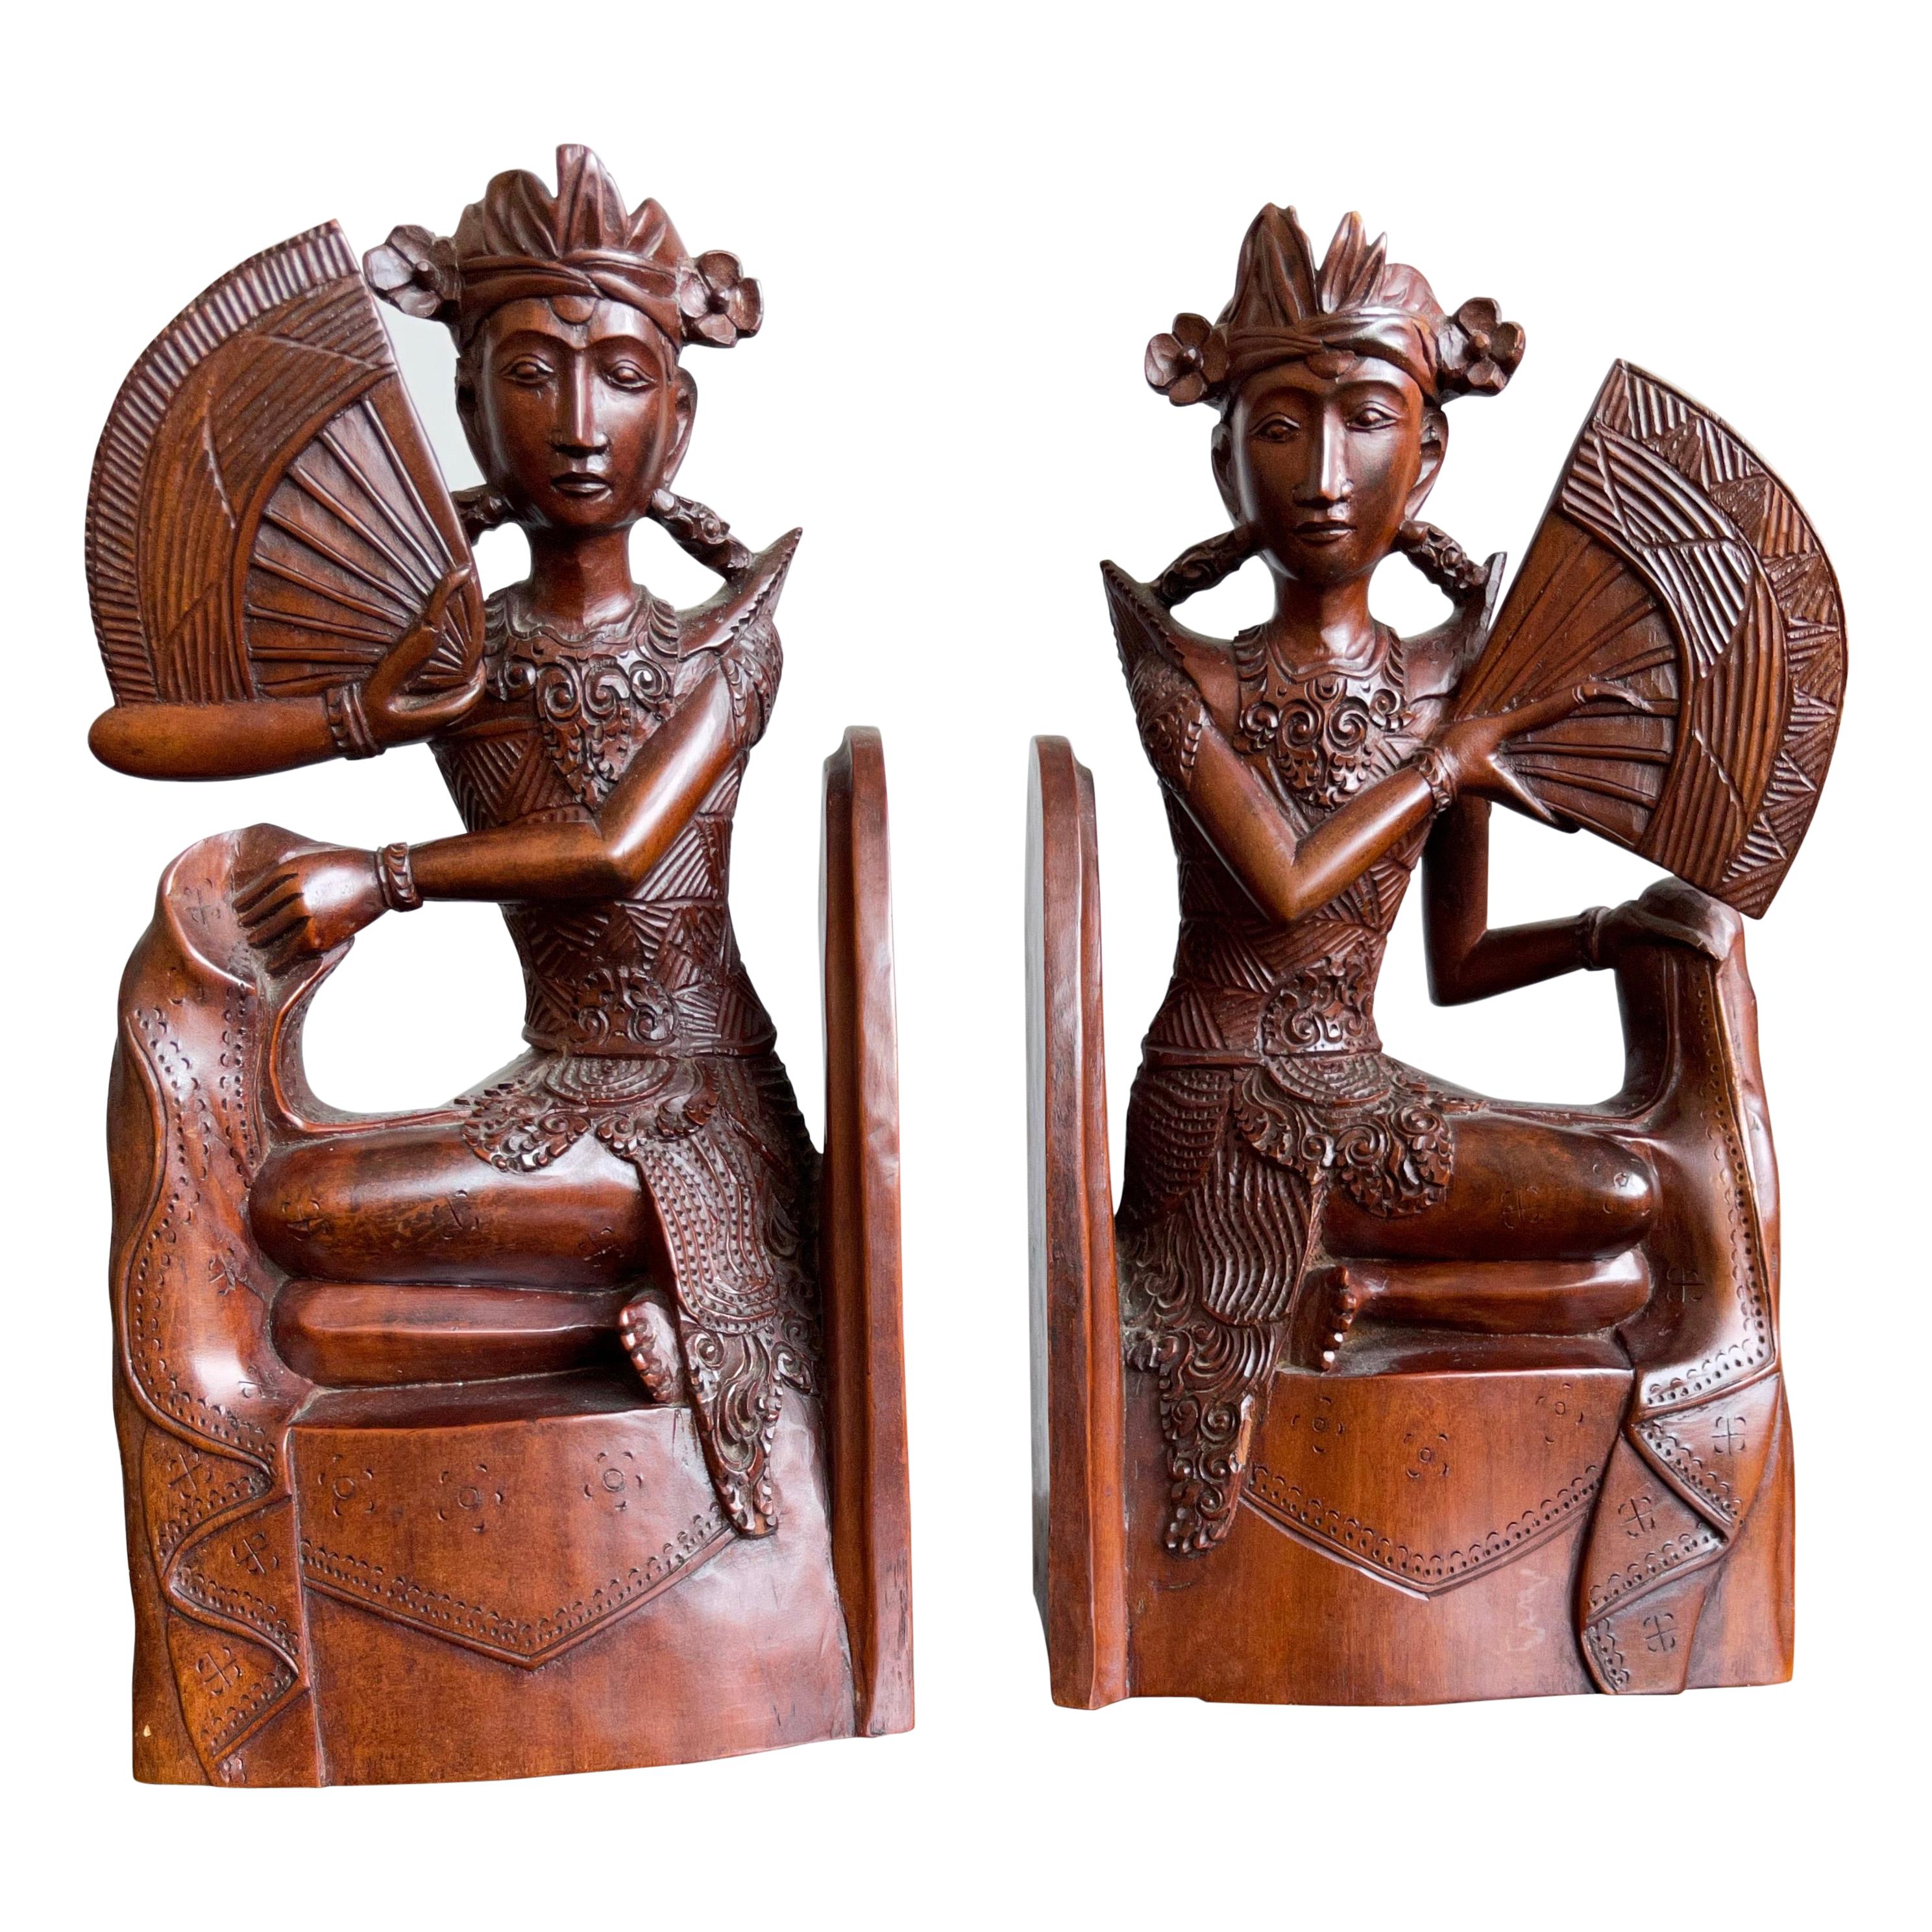 Pair of Near Antique Balinese Handcarved Wooden Bookends, Legong Dancers w. Fans